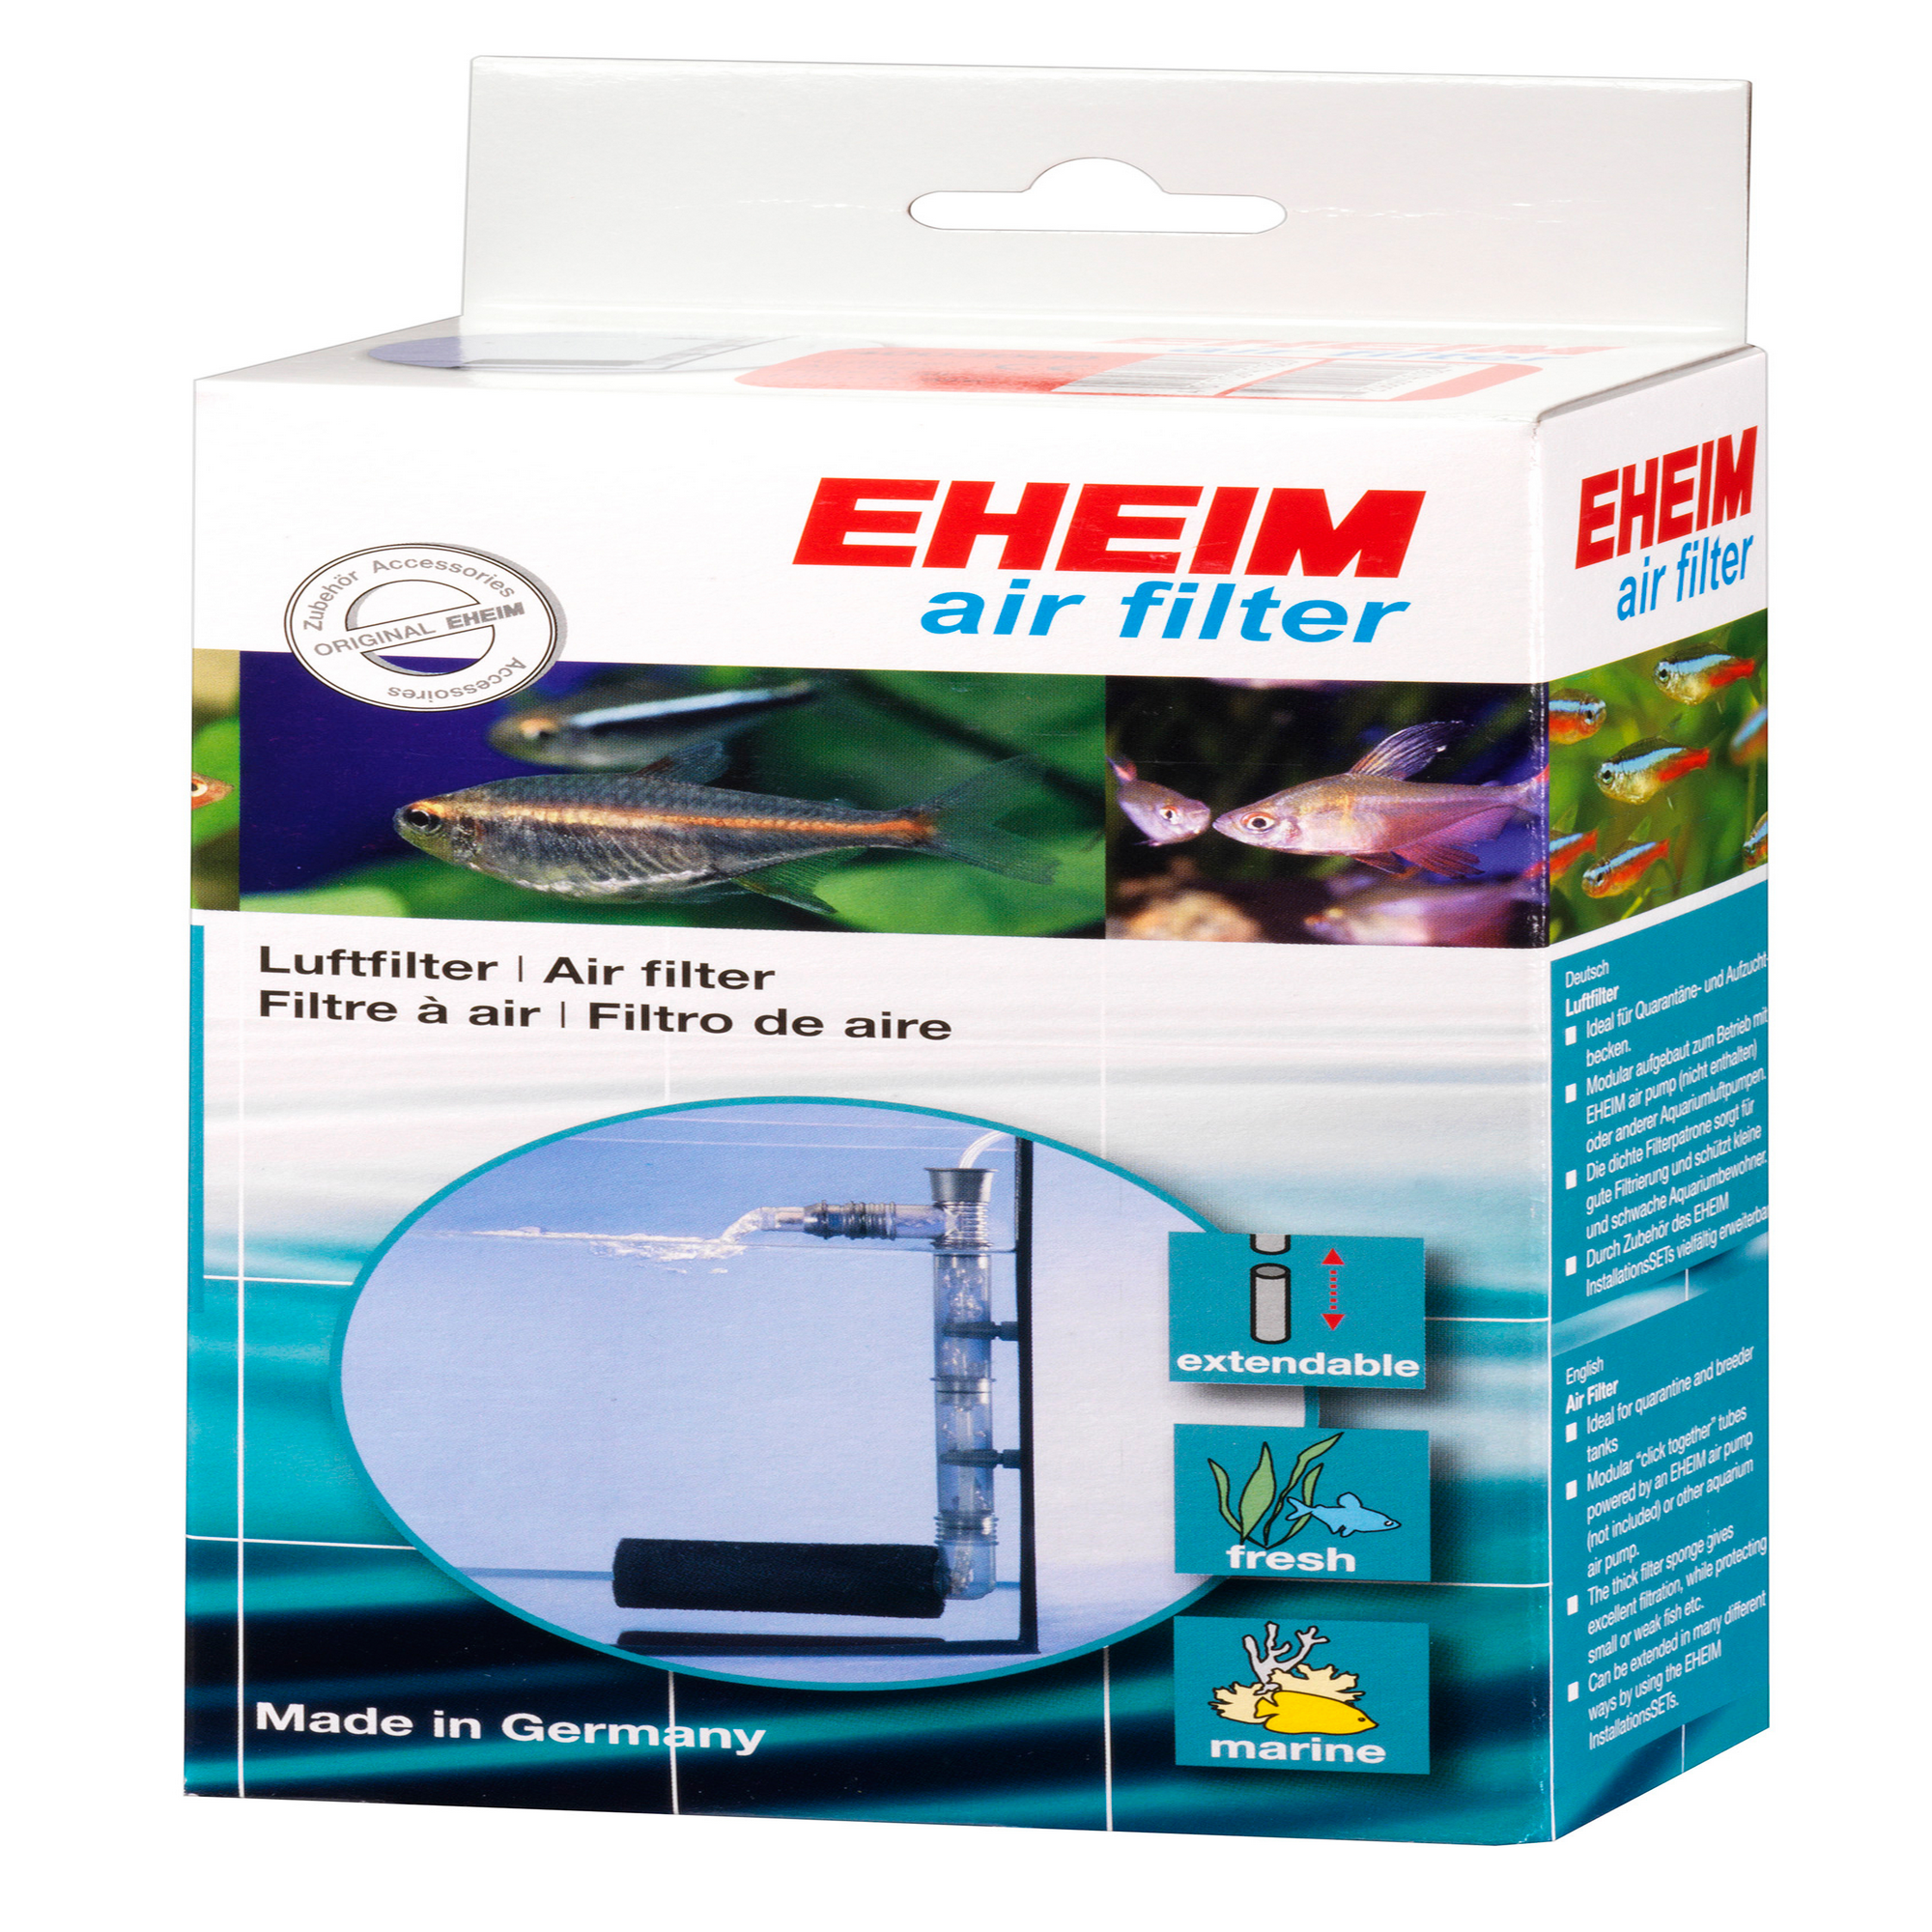 EHEIM air filter Luftfilter + product picture